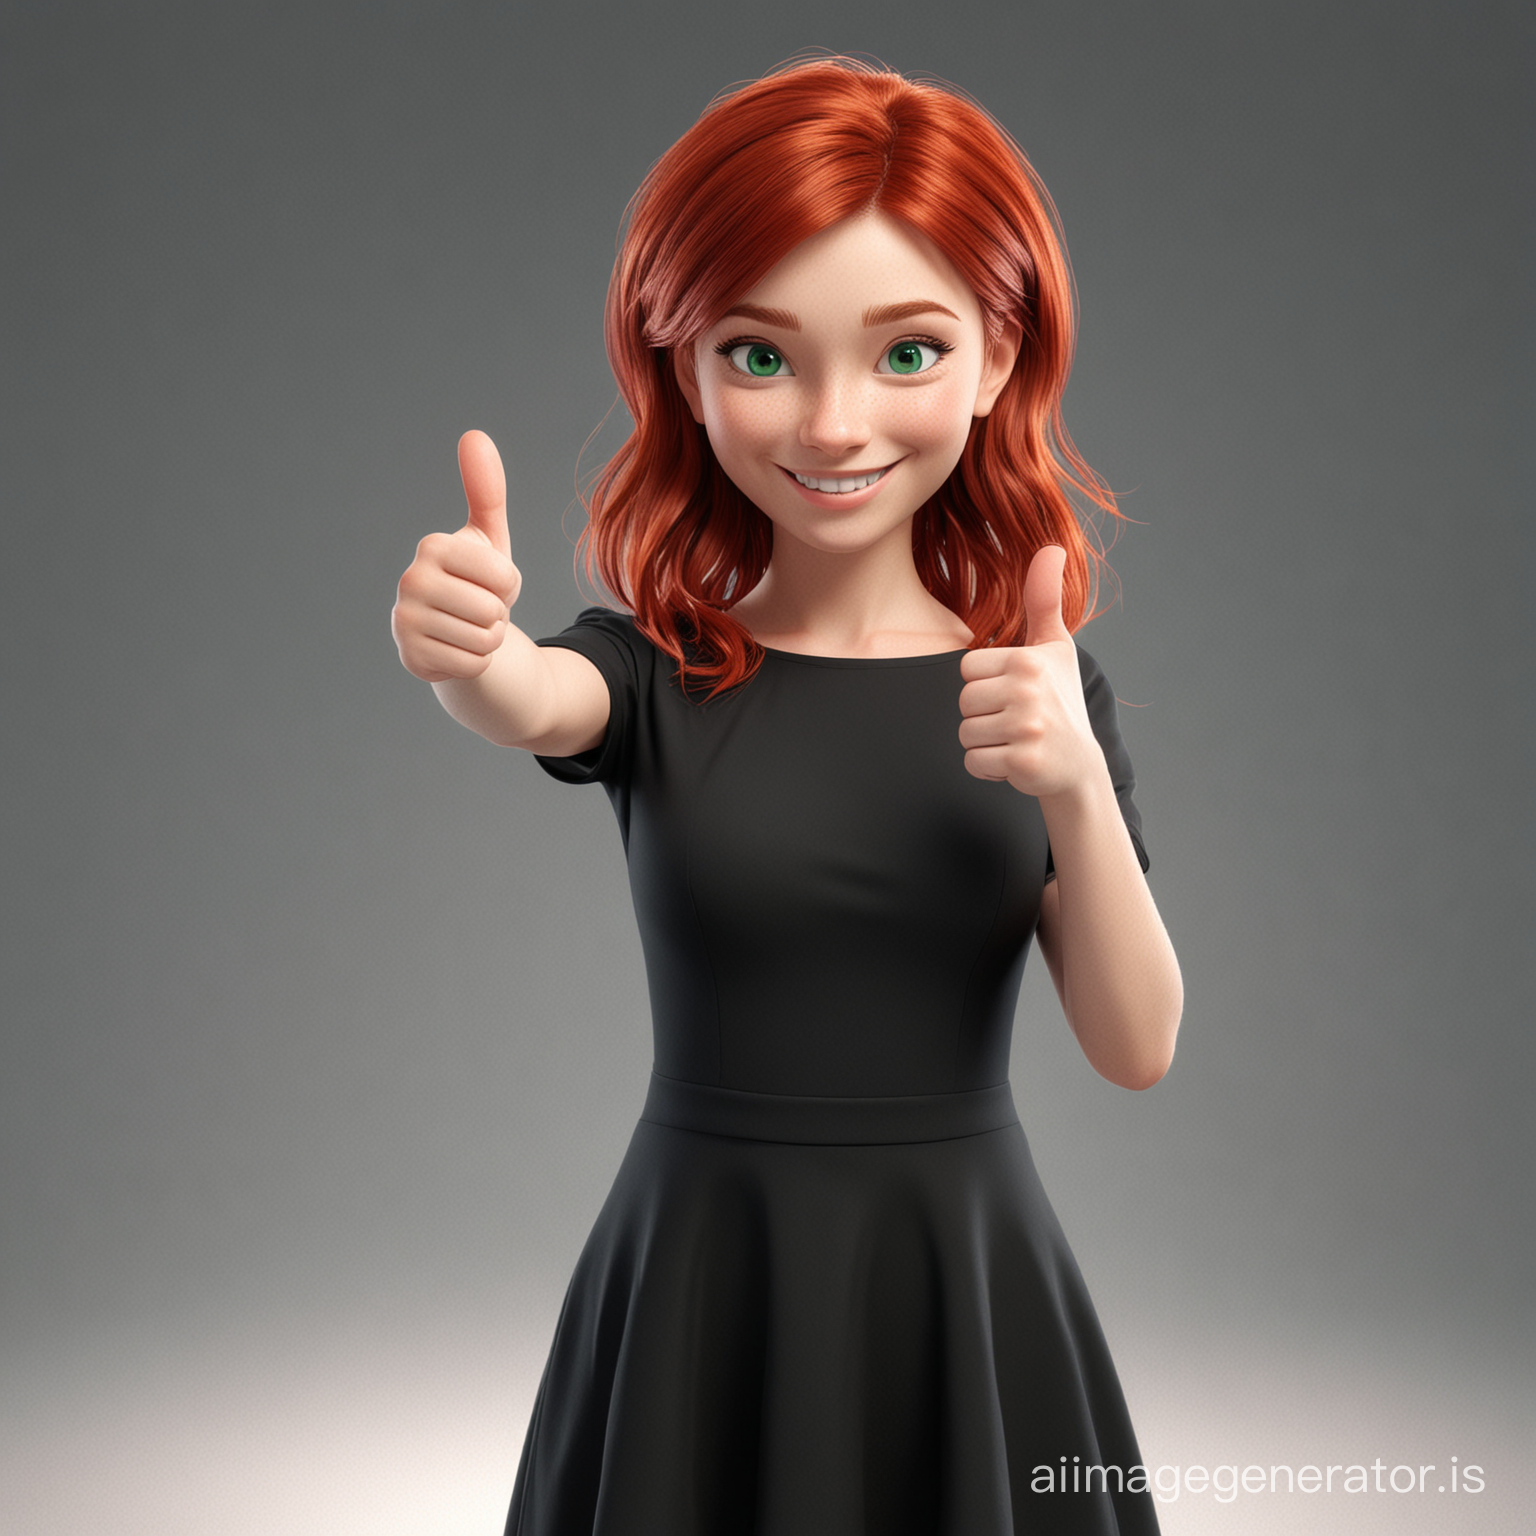 Adult girl with red hair and green eyes is very cute, wearing a black dress, showing thumbs up and smiling, 3D rendering, magical atmosphere